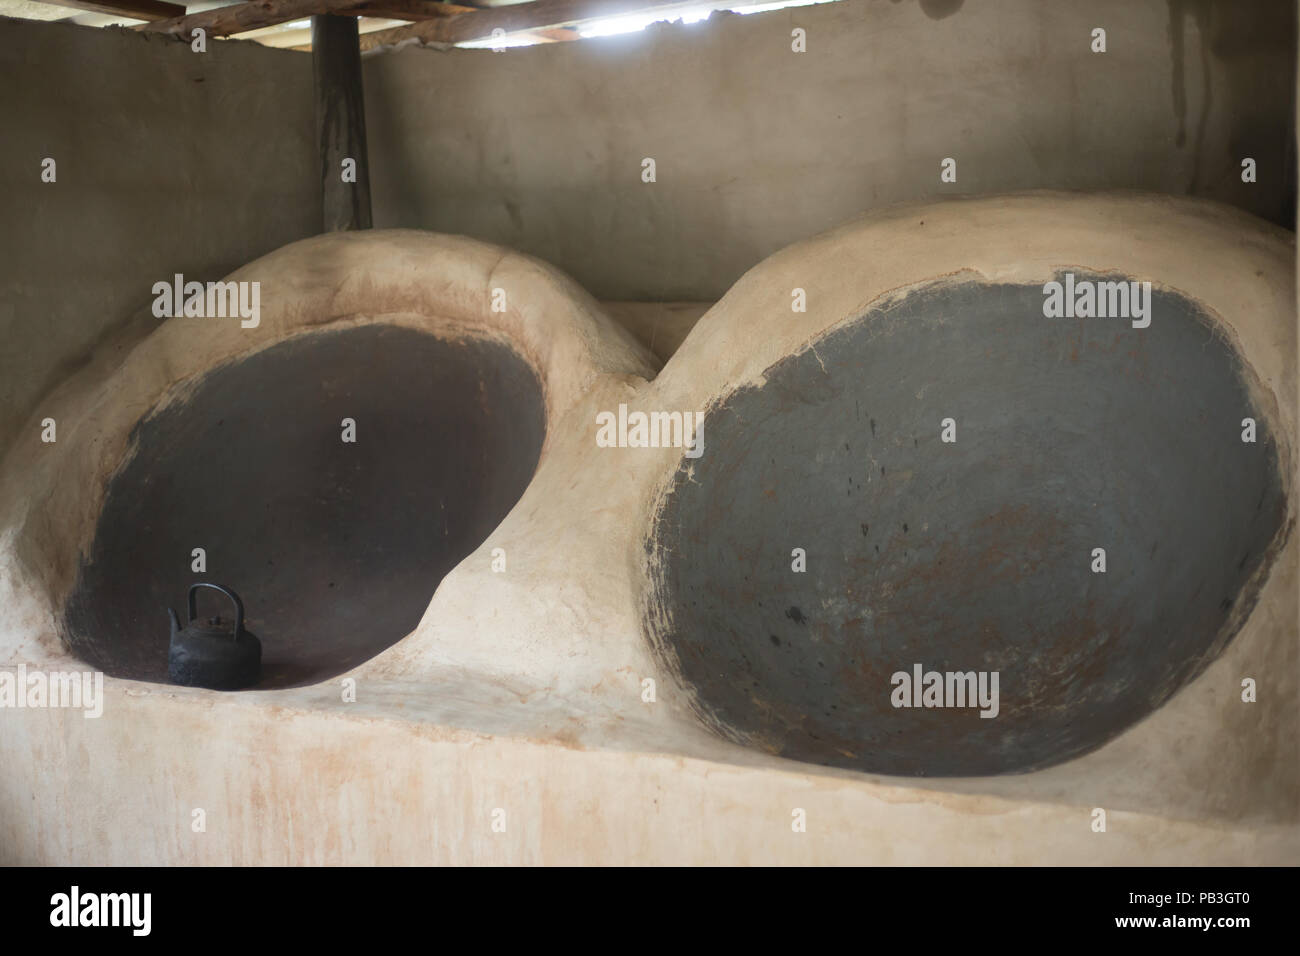 https://c8.alamy.com/comp/PB3GT0/old-process-of-dried-tea-leaf-from-hilltribe-at-high-mountain-in-thailand-this-device-made-form-big-pan-with-kiln-under-those-PB3GT0.jpg